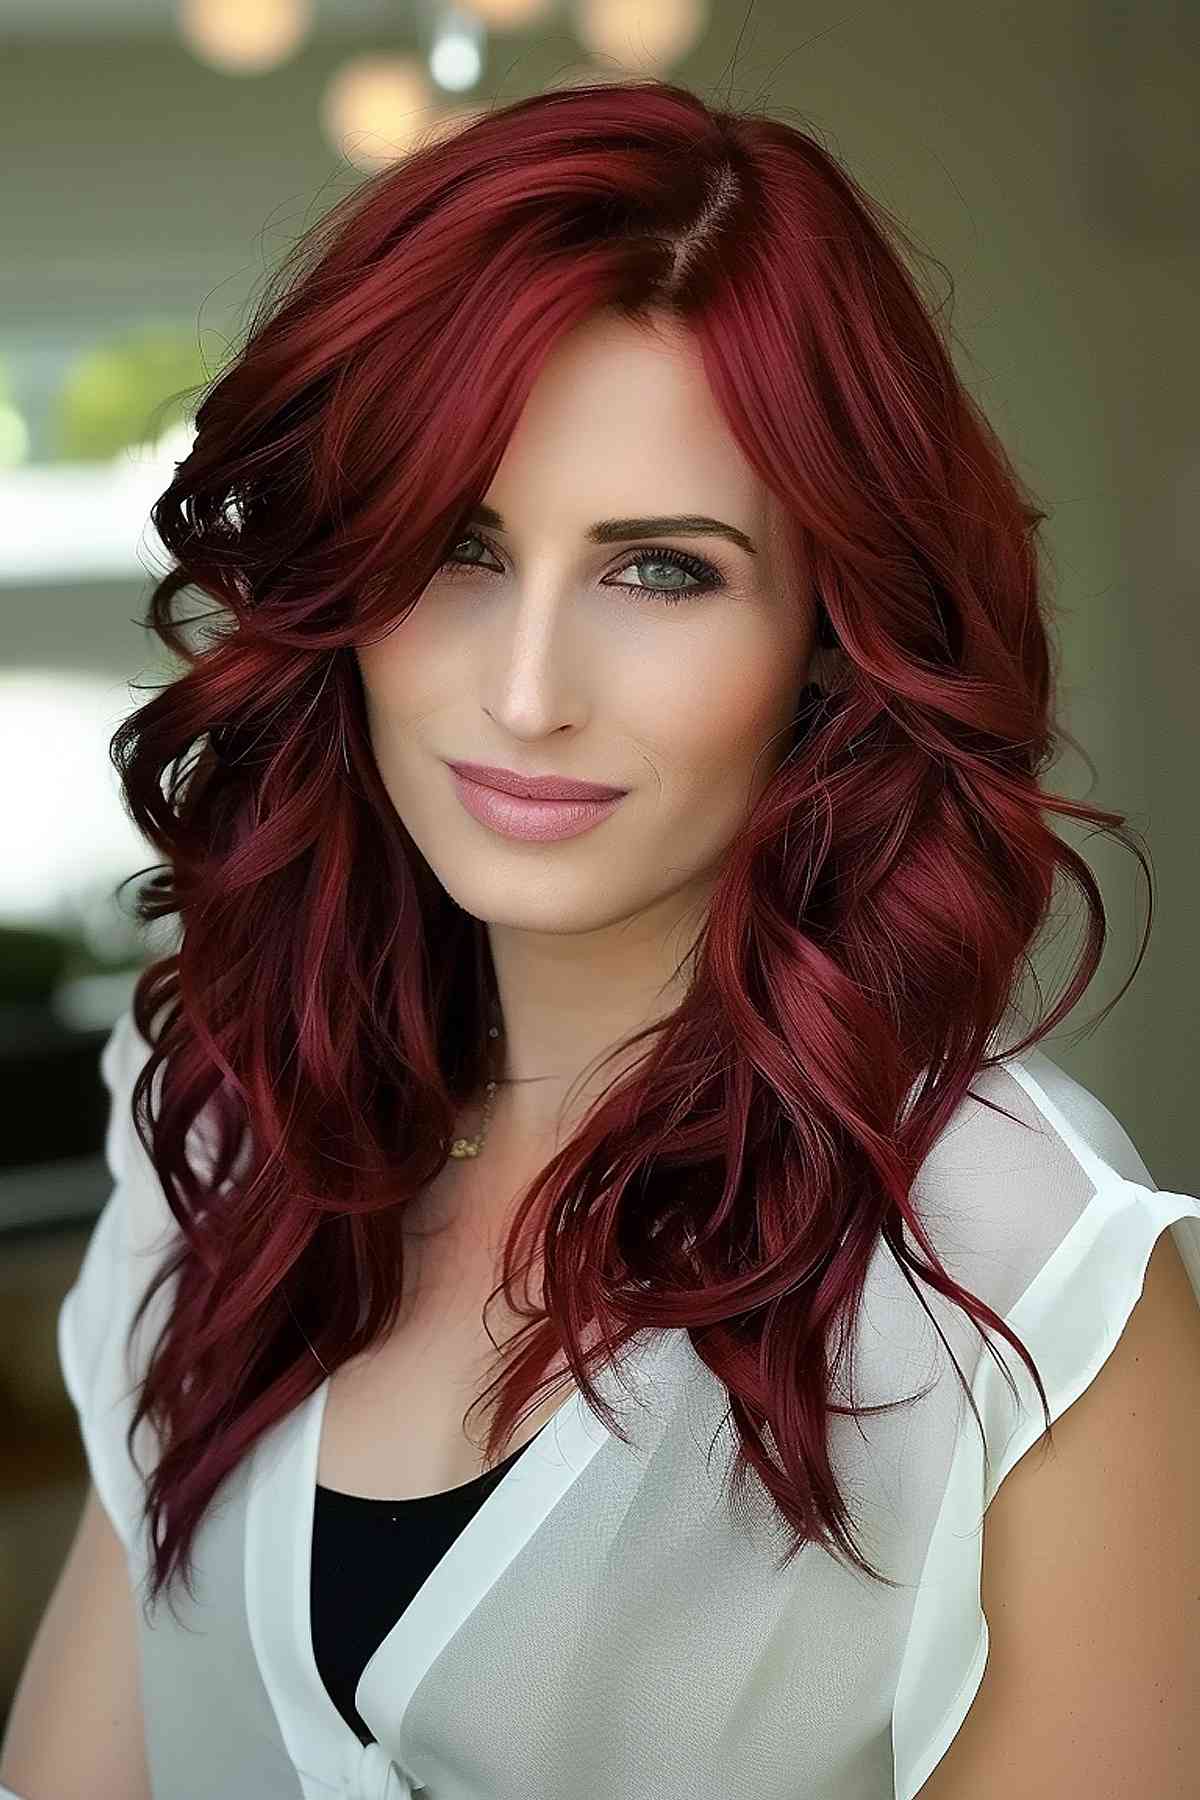 Fair skin complementing wavy cherry red hair with a side part.